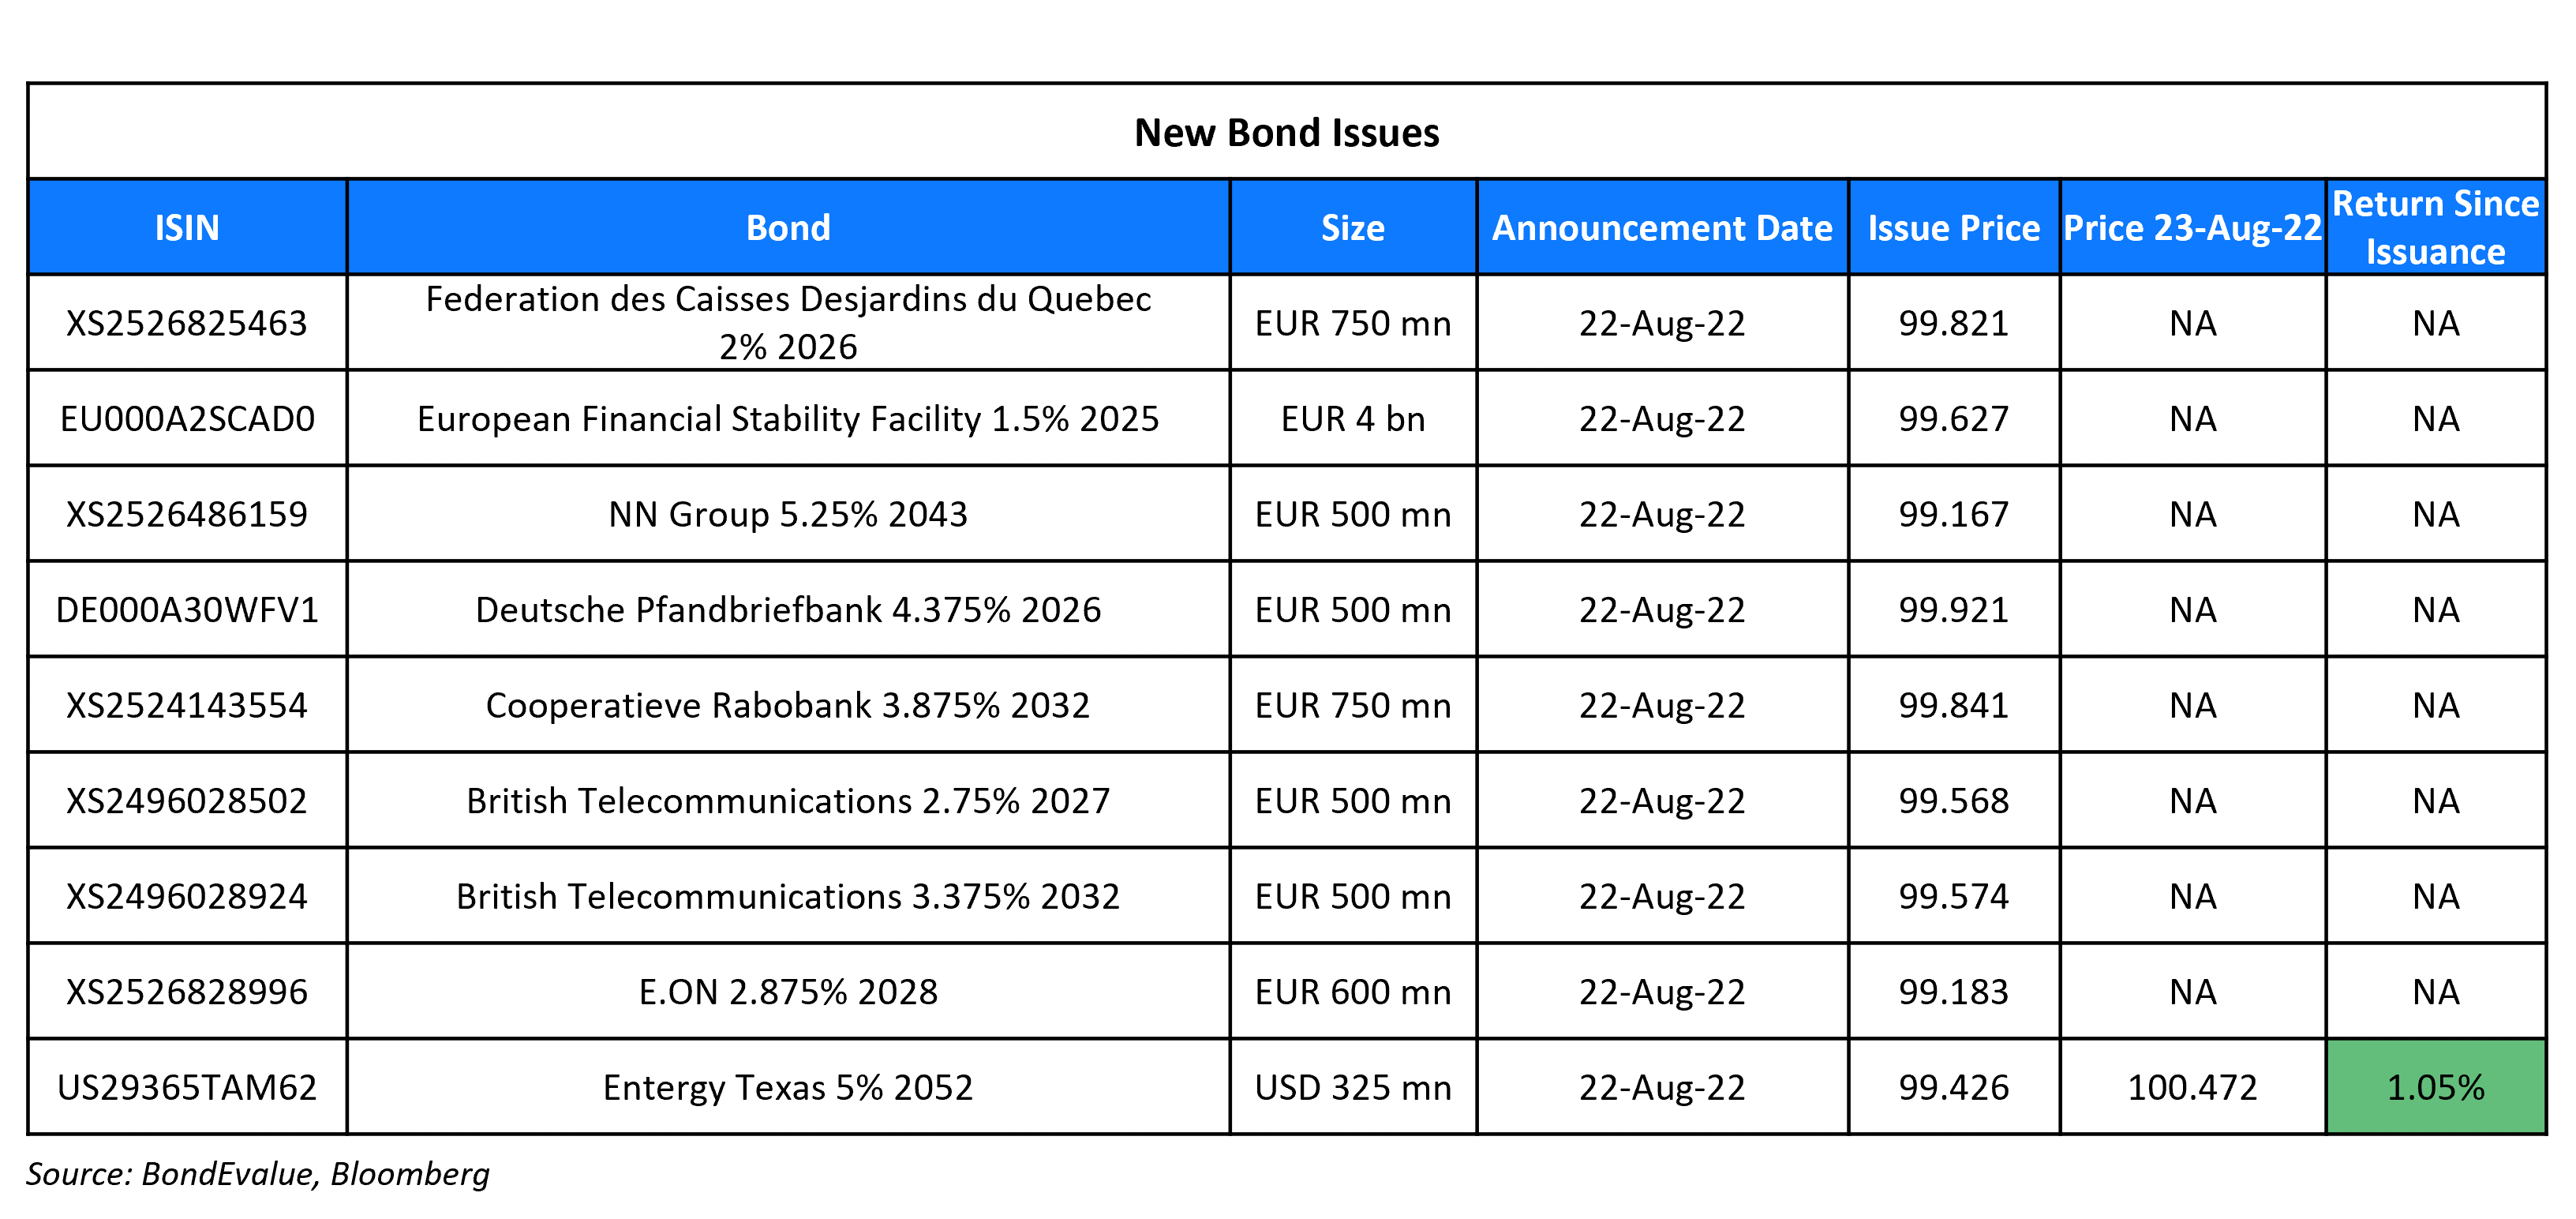 New Bond Issues 23 Aug 22